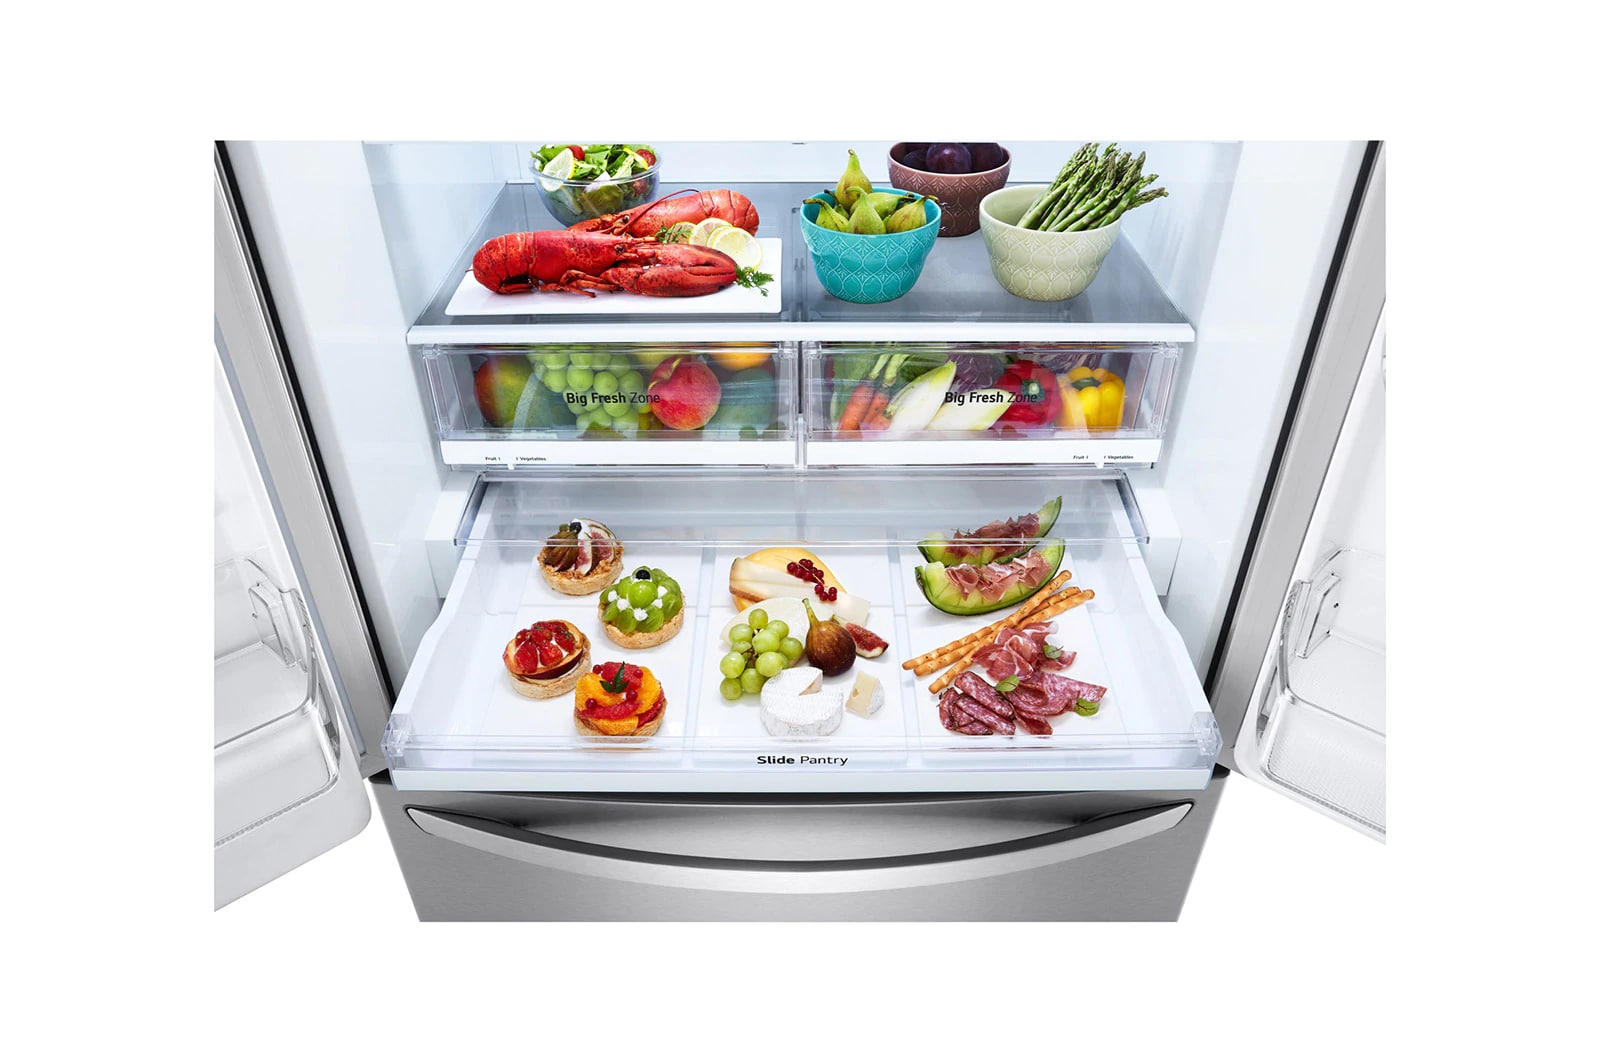 LG - 35.75 Inch 29 cu. ft French Door Refrigerator in Stainless - LRFWS2906S